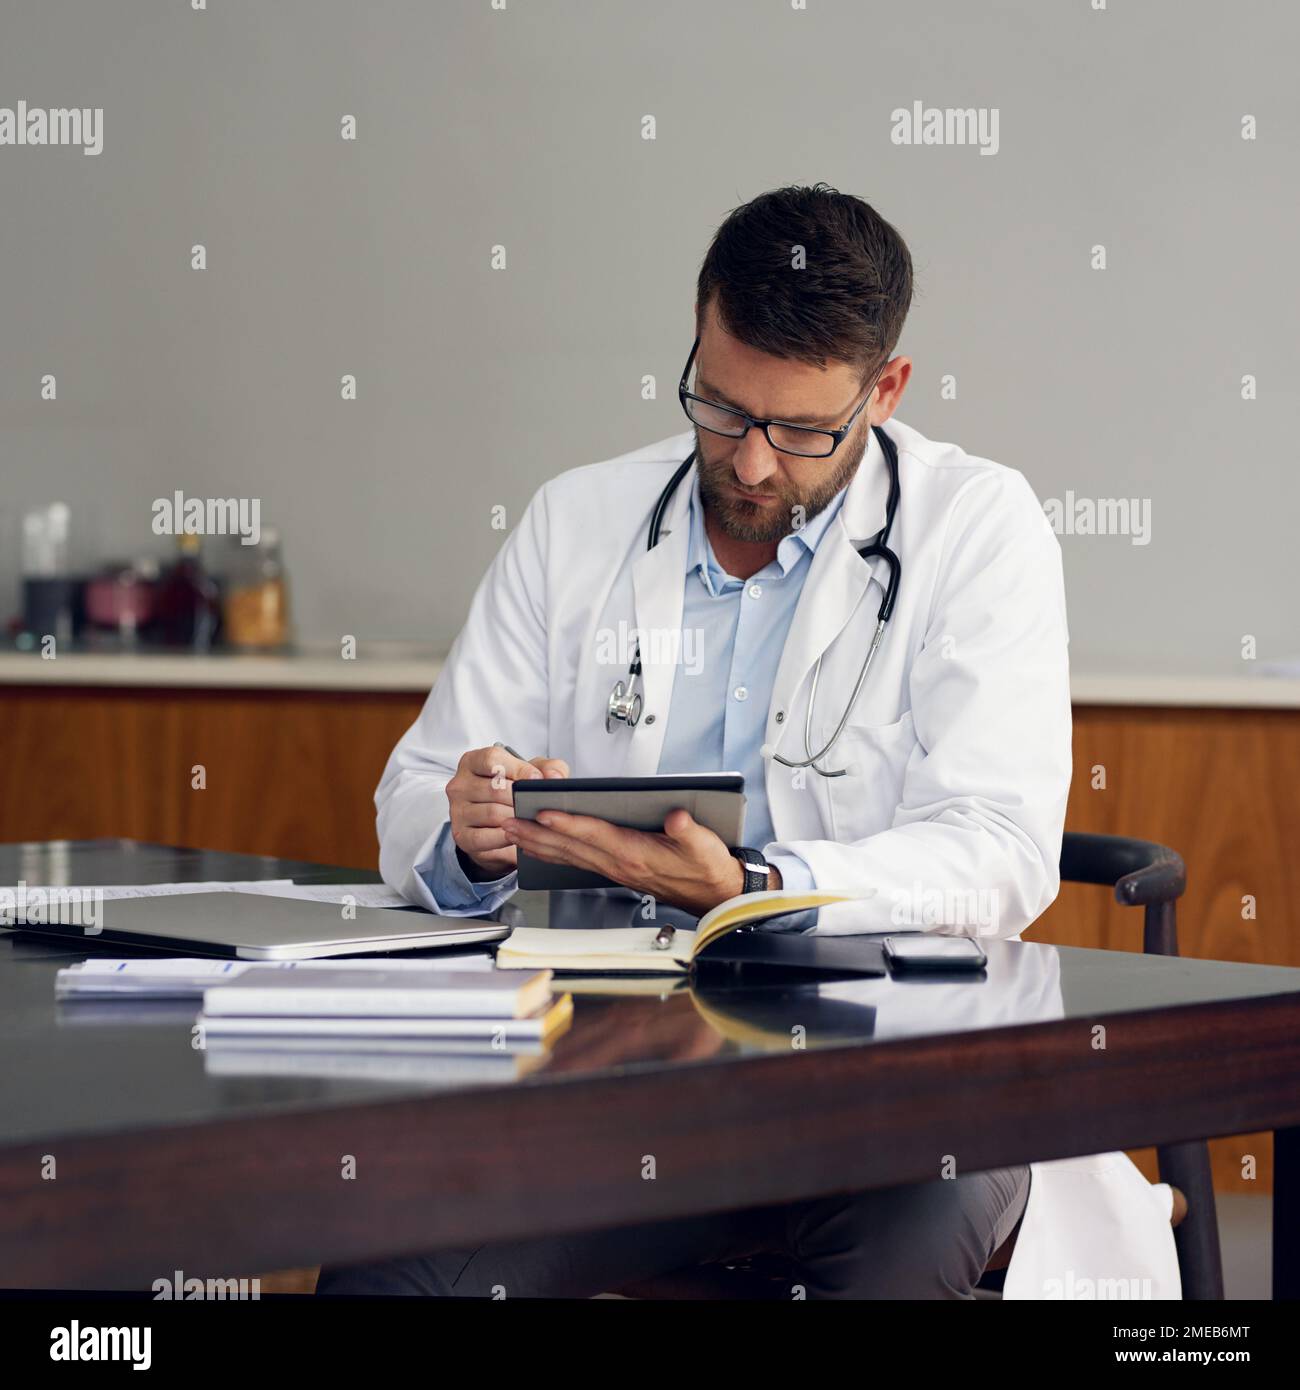 Record-keeping is easy on his digital tablet. a handsome male doctor working on his tablet while sitting in his office. Stock Photo